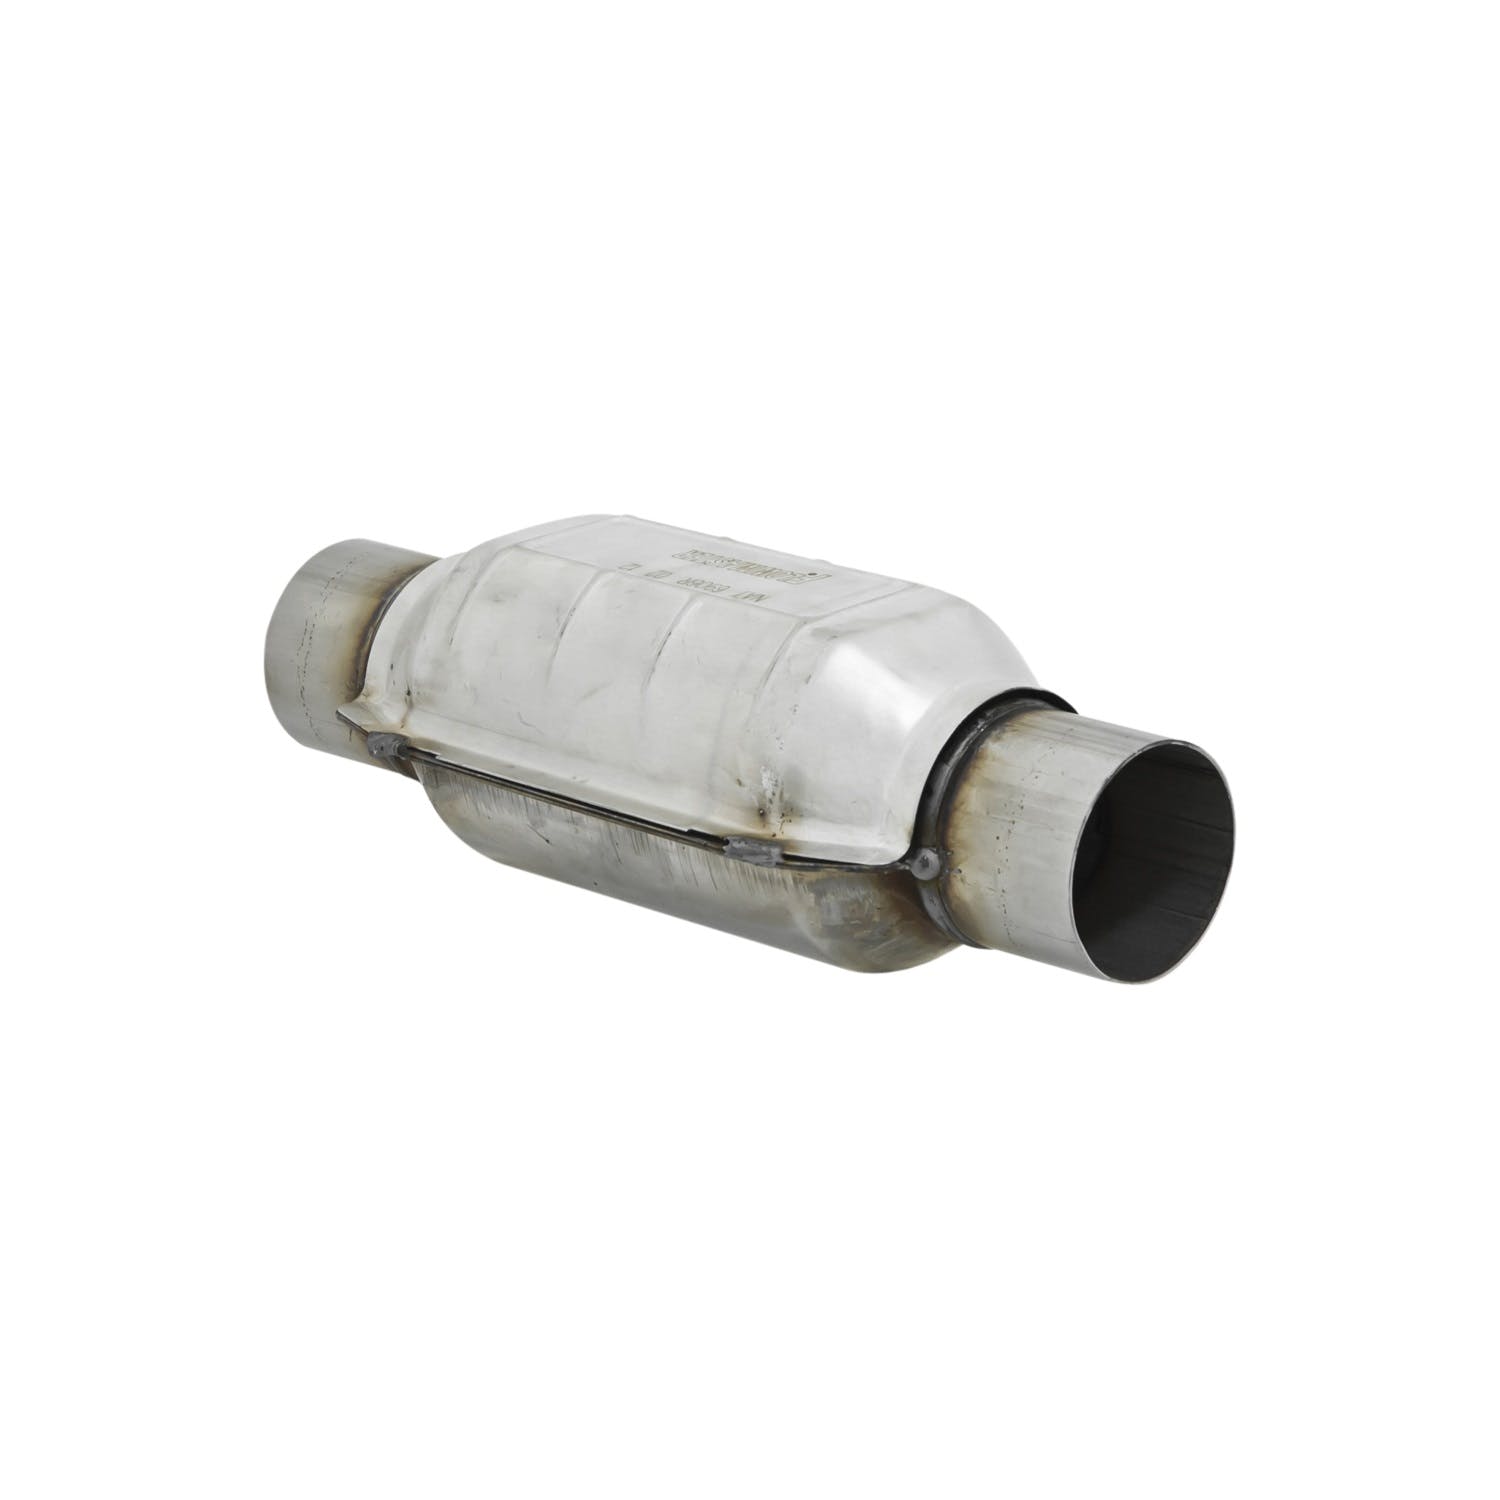 Flowmaster Catalytic Converters 2220125 Catalytic Converter-Universal-222 Series-2.50 in. Inlet/Outlet-49 State